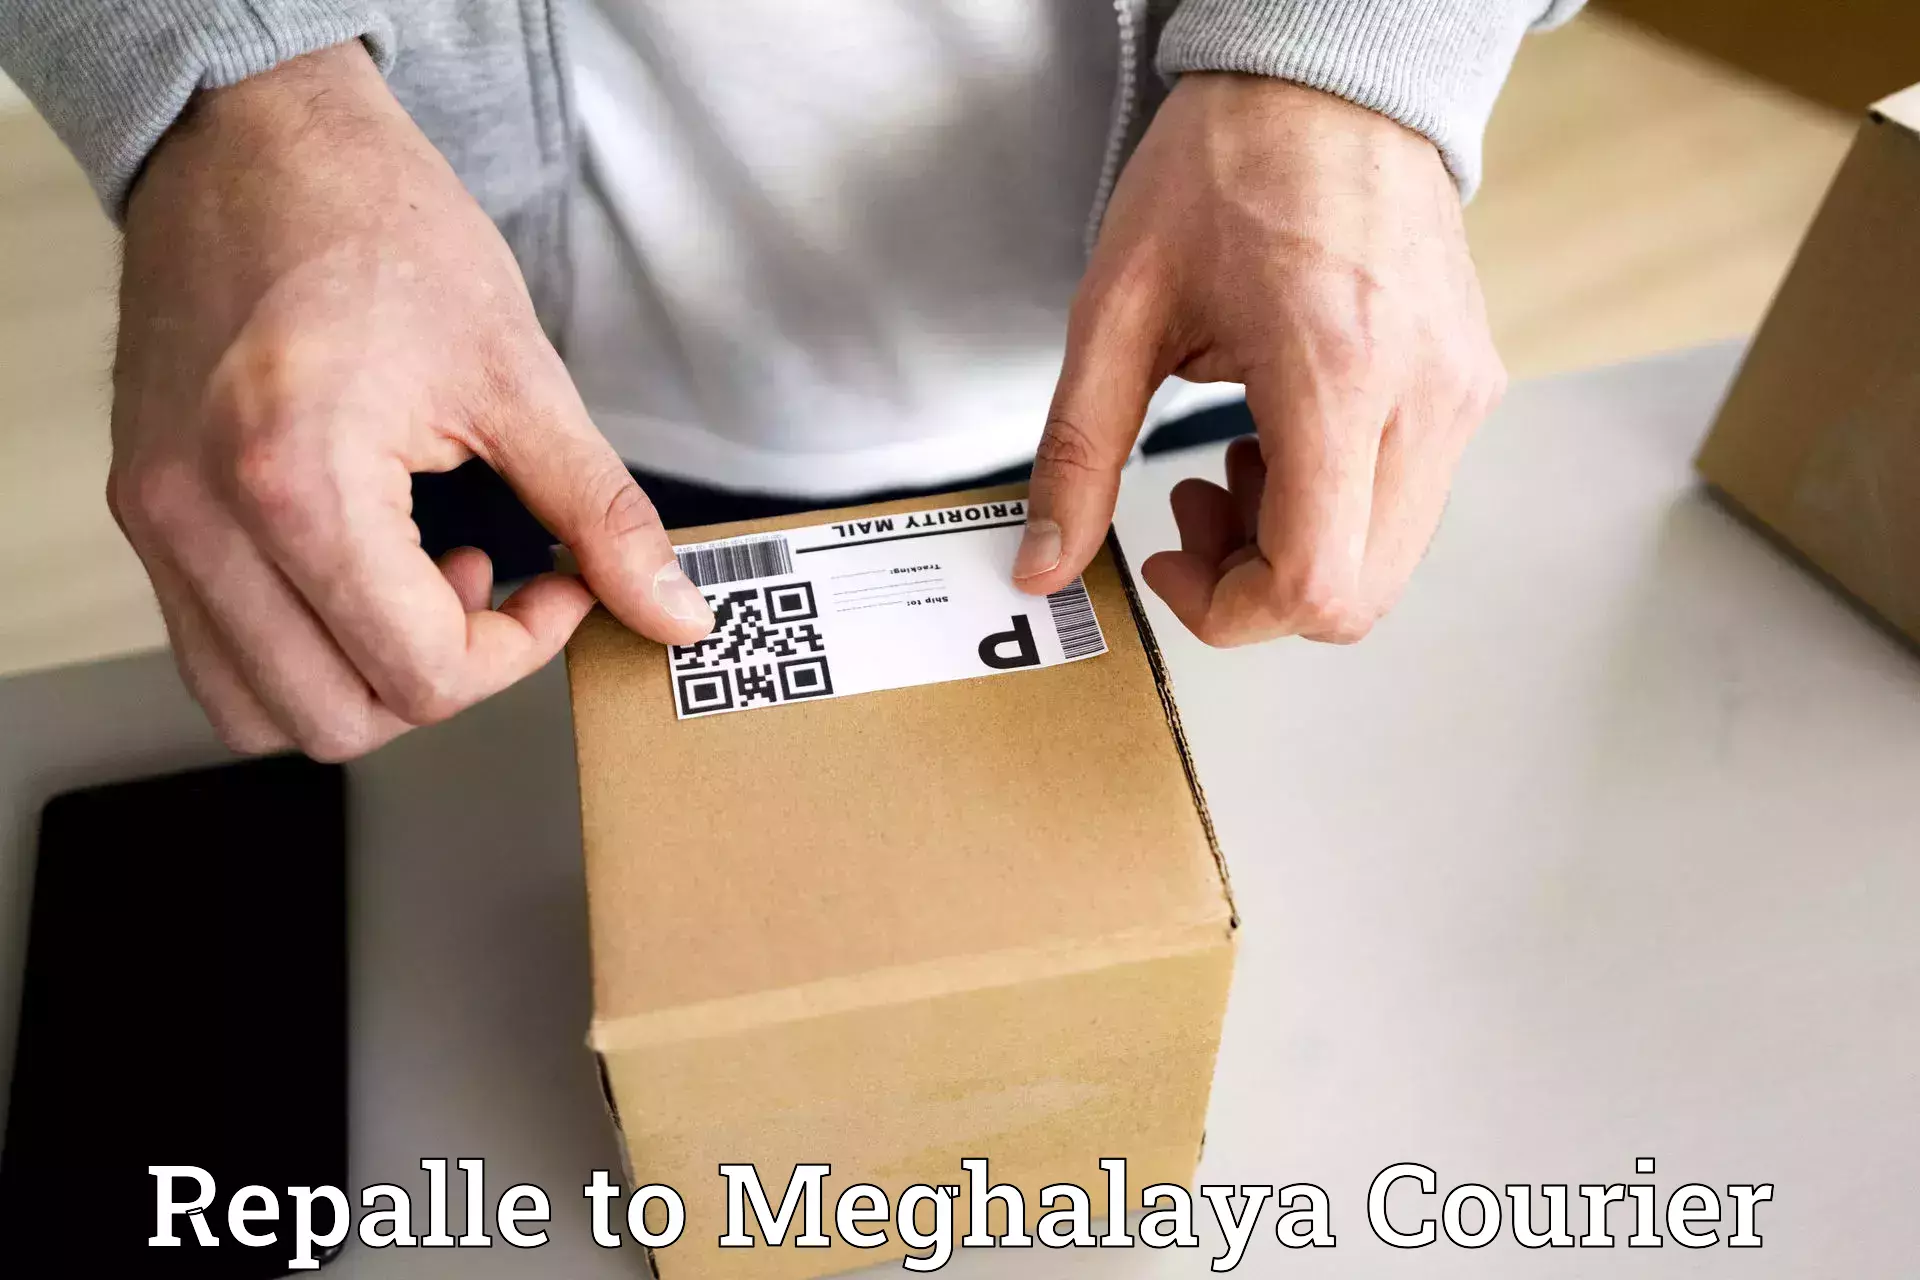 Comprehensive parcel tracking Repalle to Jowai